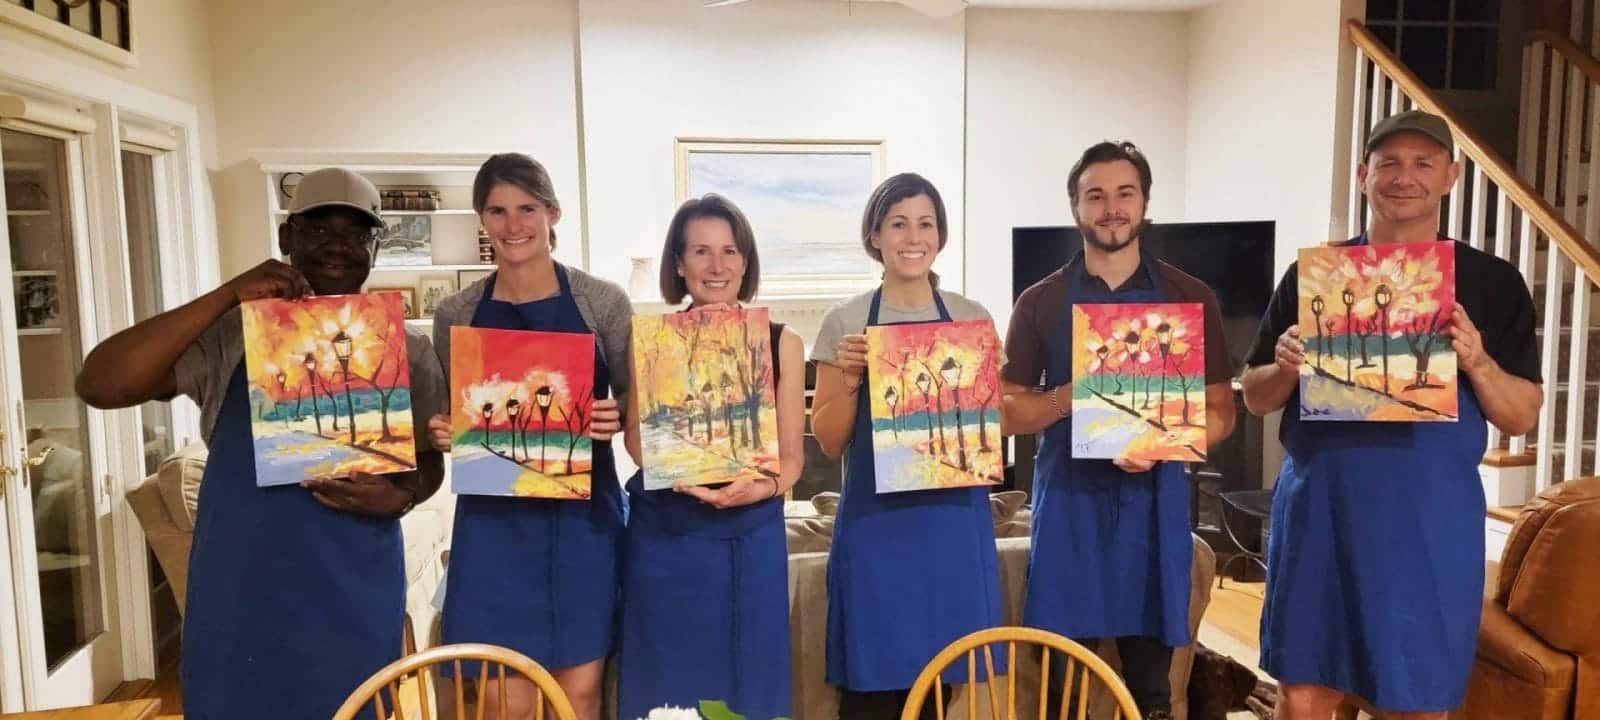 A group of people participating in a DC sip and paint event, holding up paintings in a living room.